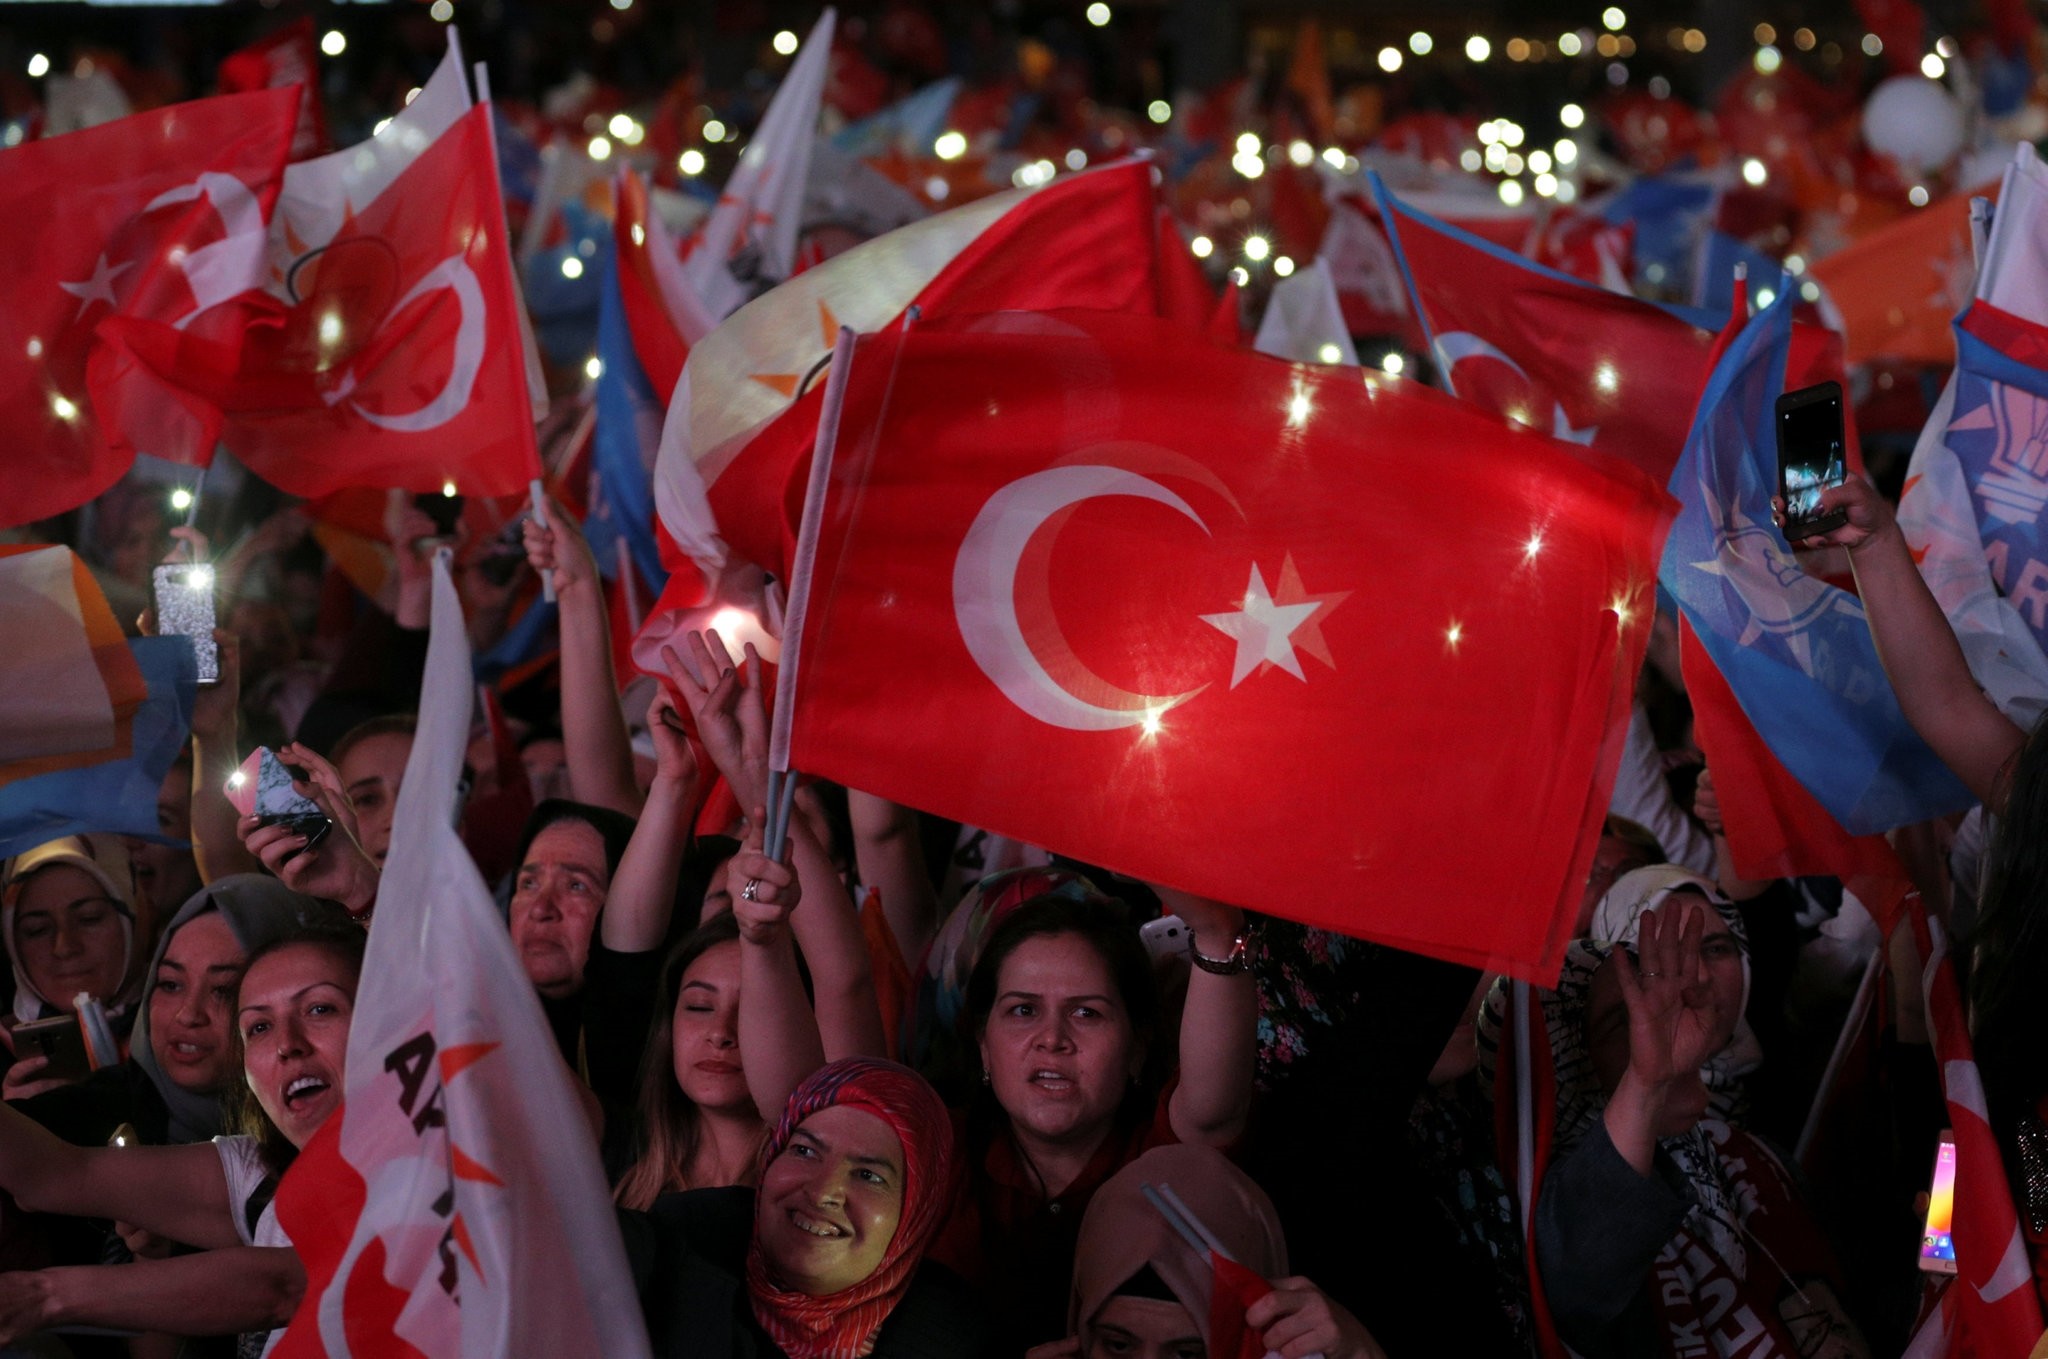 AK Party supporters wave flags to celebrate the June 24 results in front of their party's headquarters, Ankara, June 24.